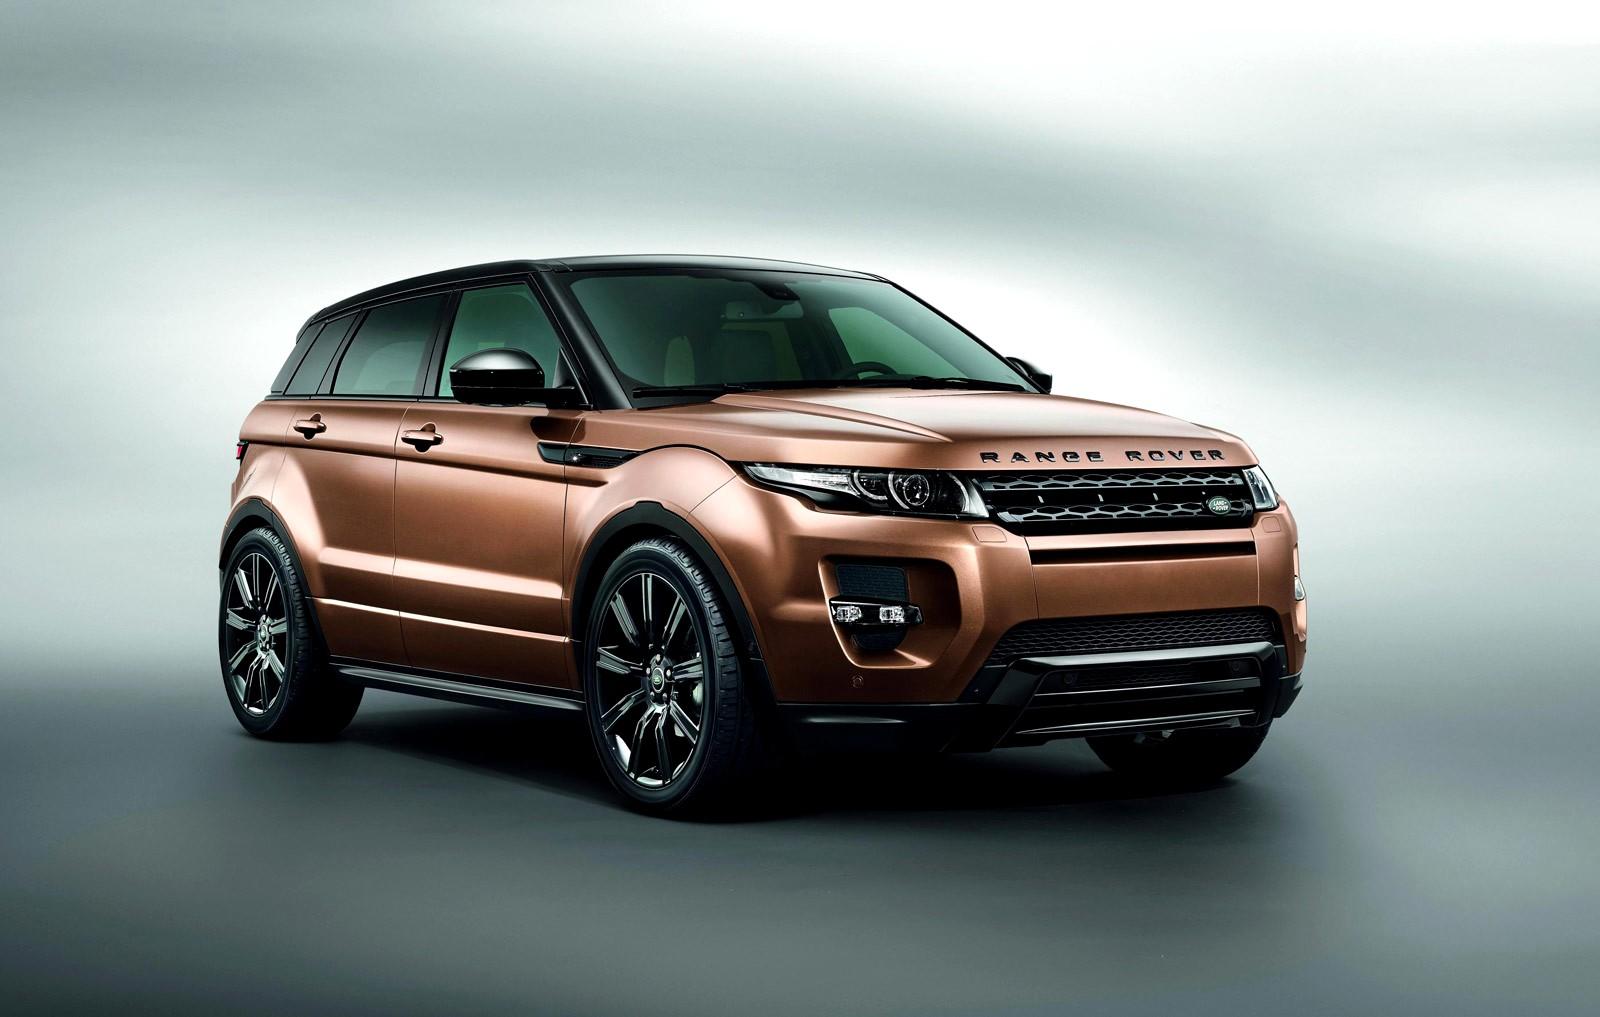 Range Rover Evoque wallpapers HD quality